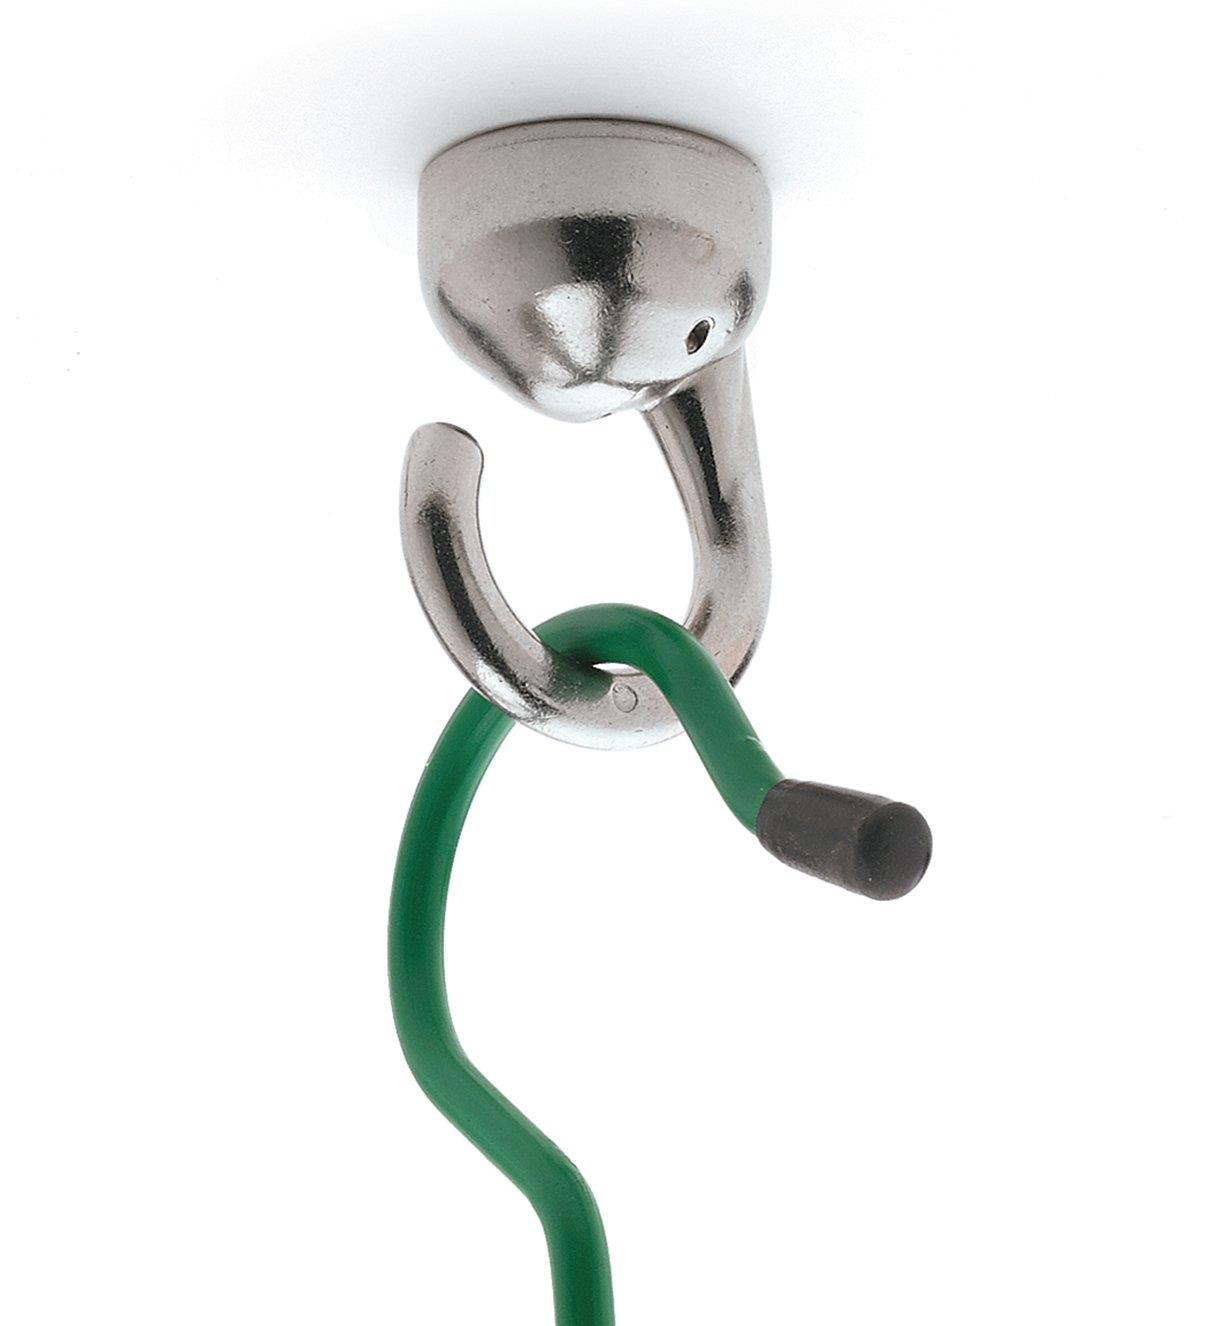 A garden hook hanging from an installed Nickel-Plate Elephant Ceiling Hook